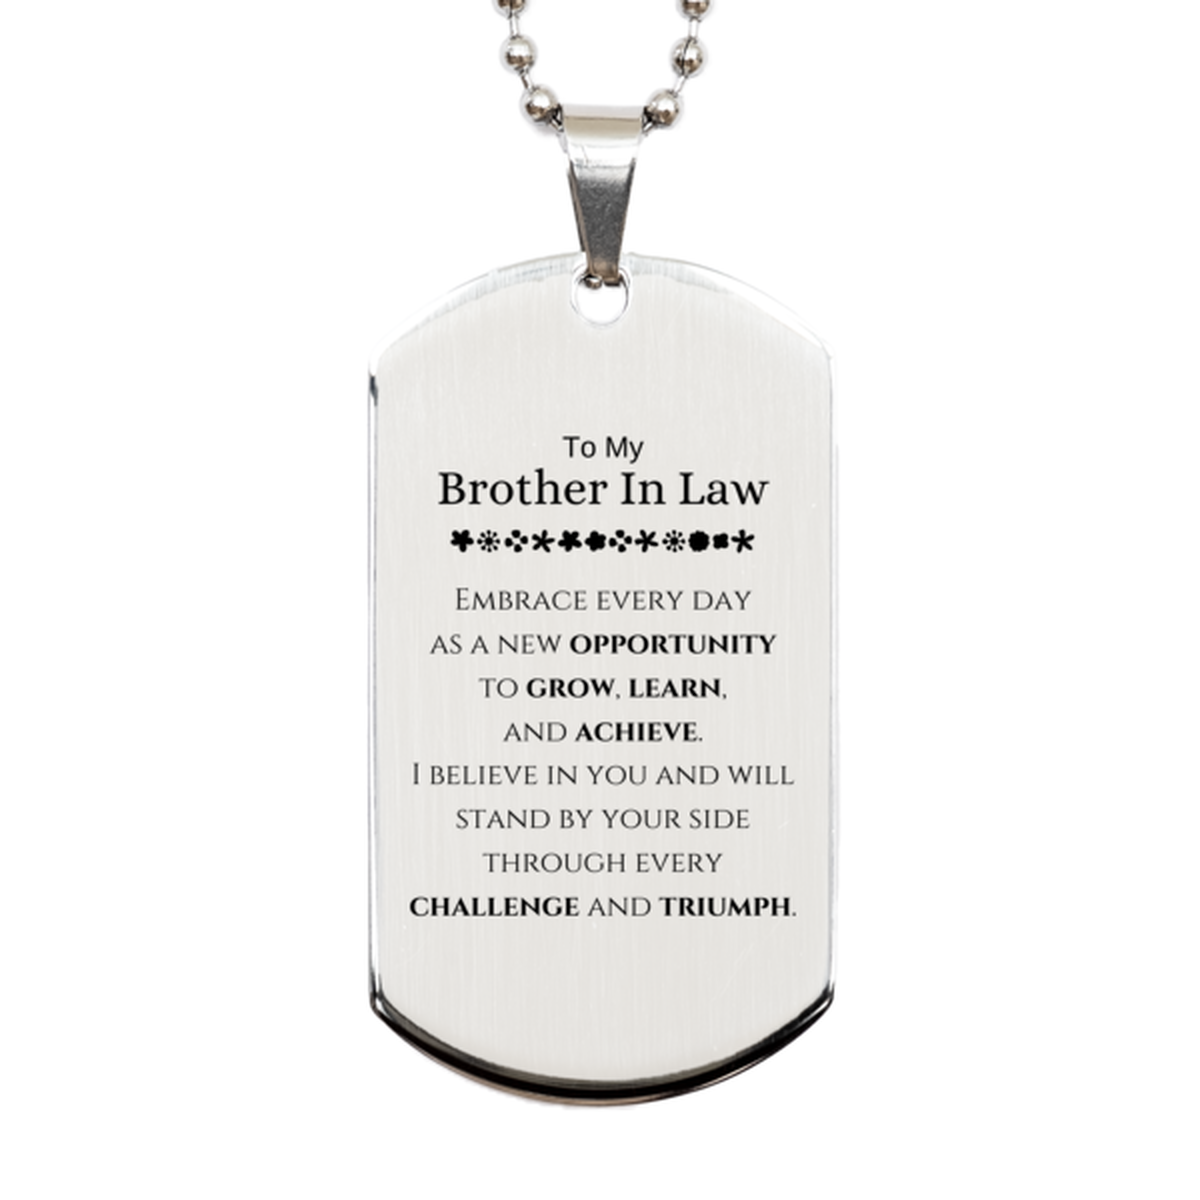 To My Brother In Law Gifts, I believe in you and will stand by your side, Inspirational Silver Dog Tag For Brother In Law, Birthday Christmas Motivational Brother In Law Gifts